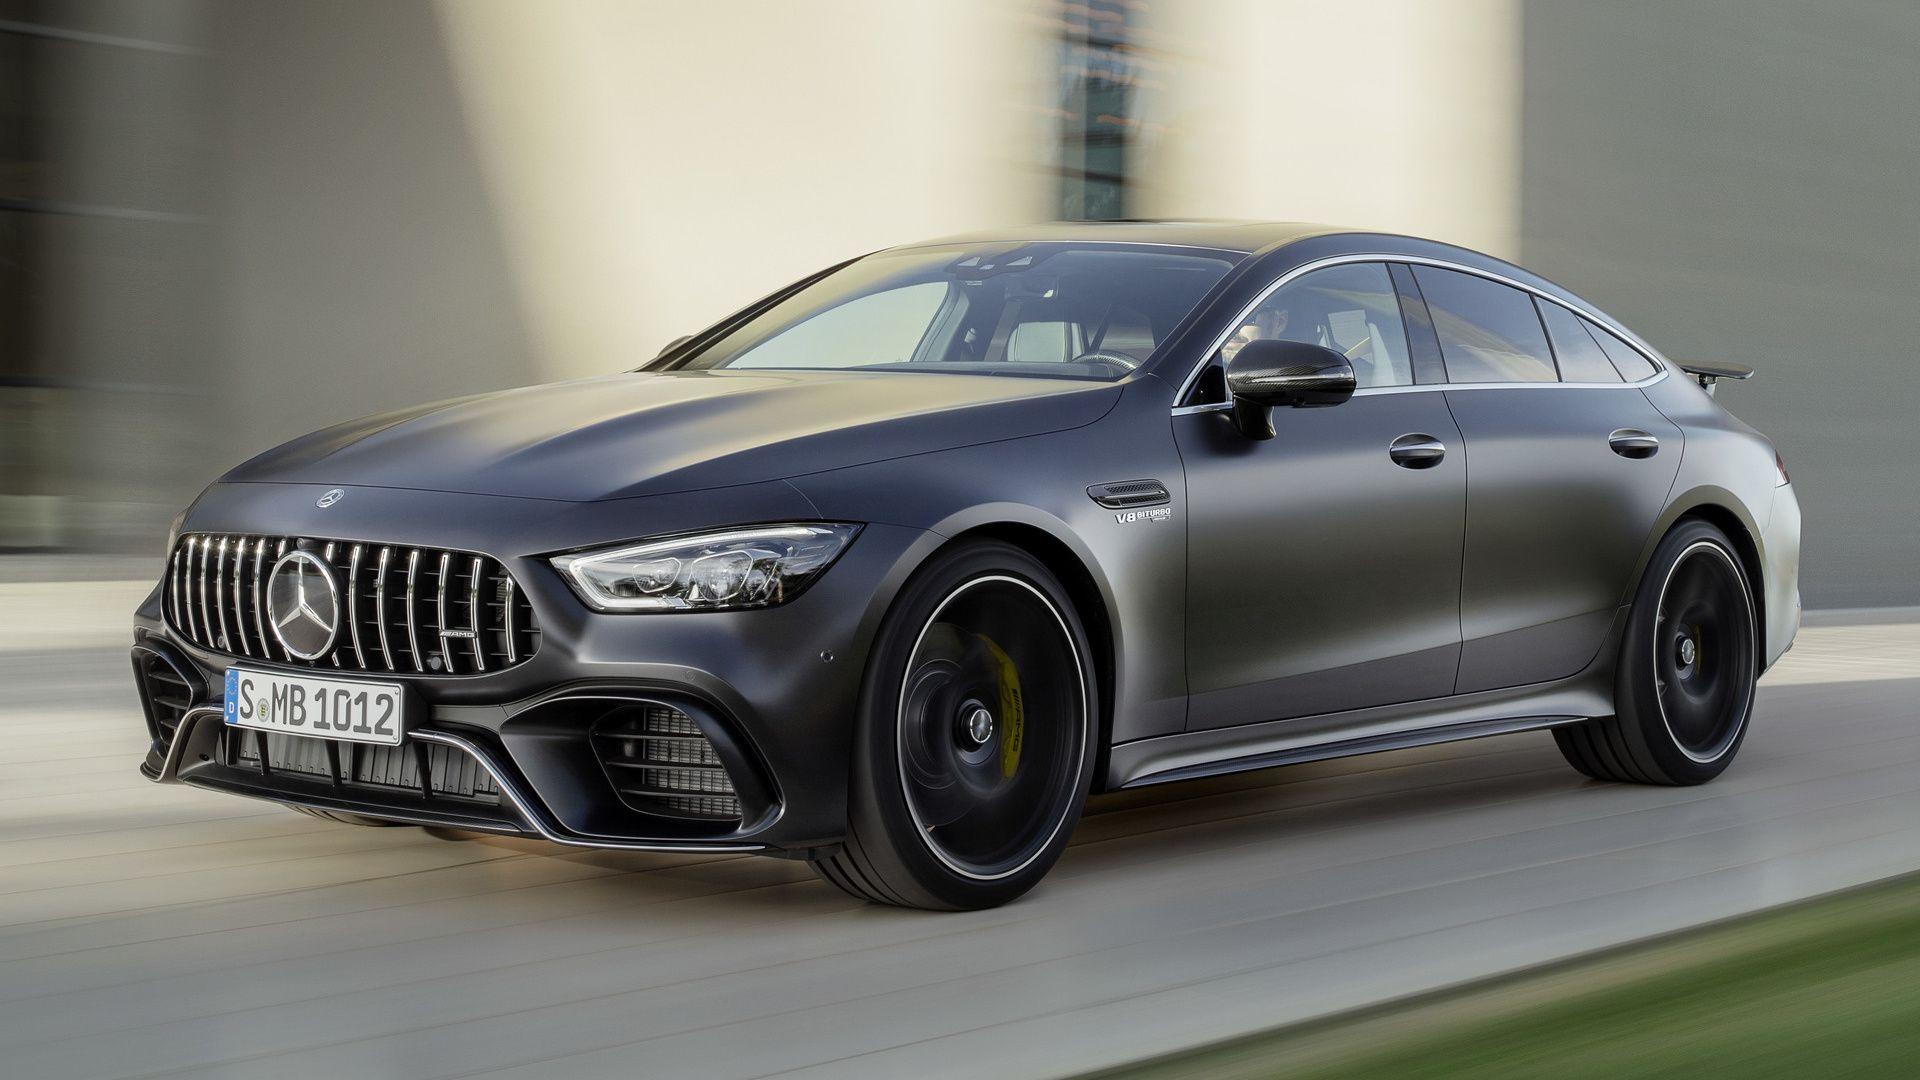 Mercedes AMG GT 63 S Wallpapers Top Free Mercedes AMG GT 63 S